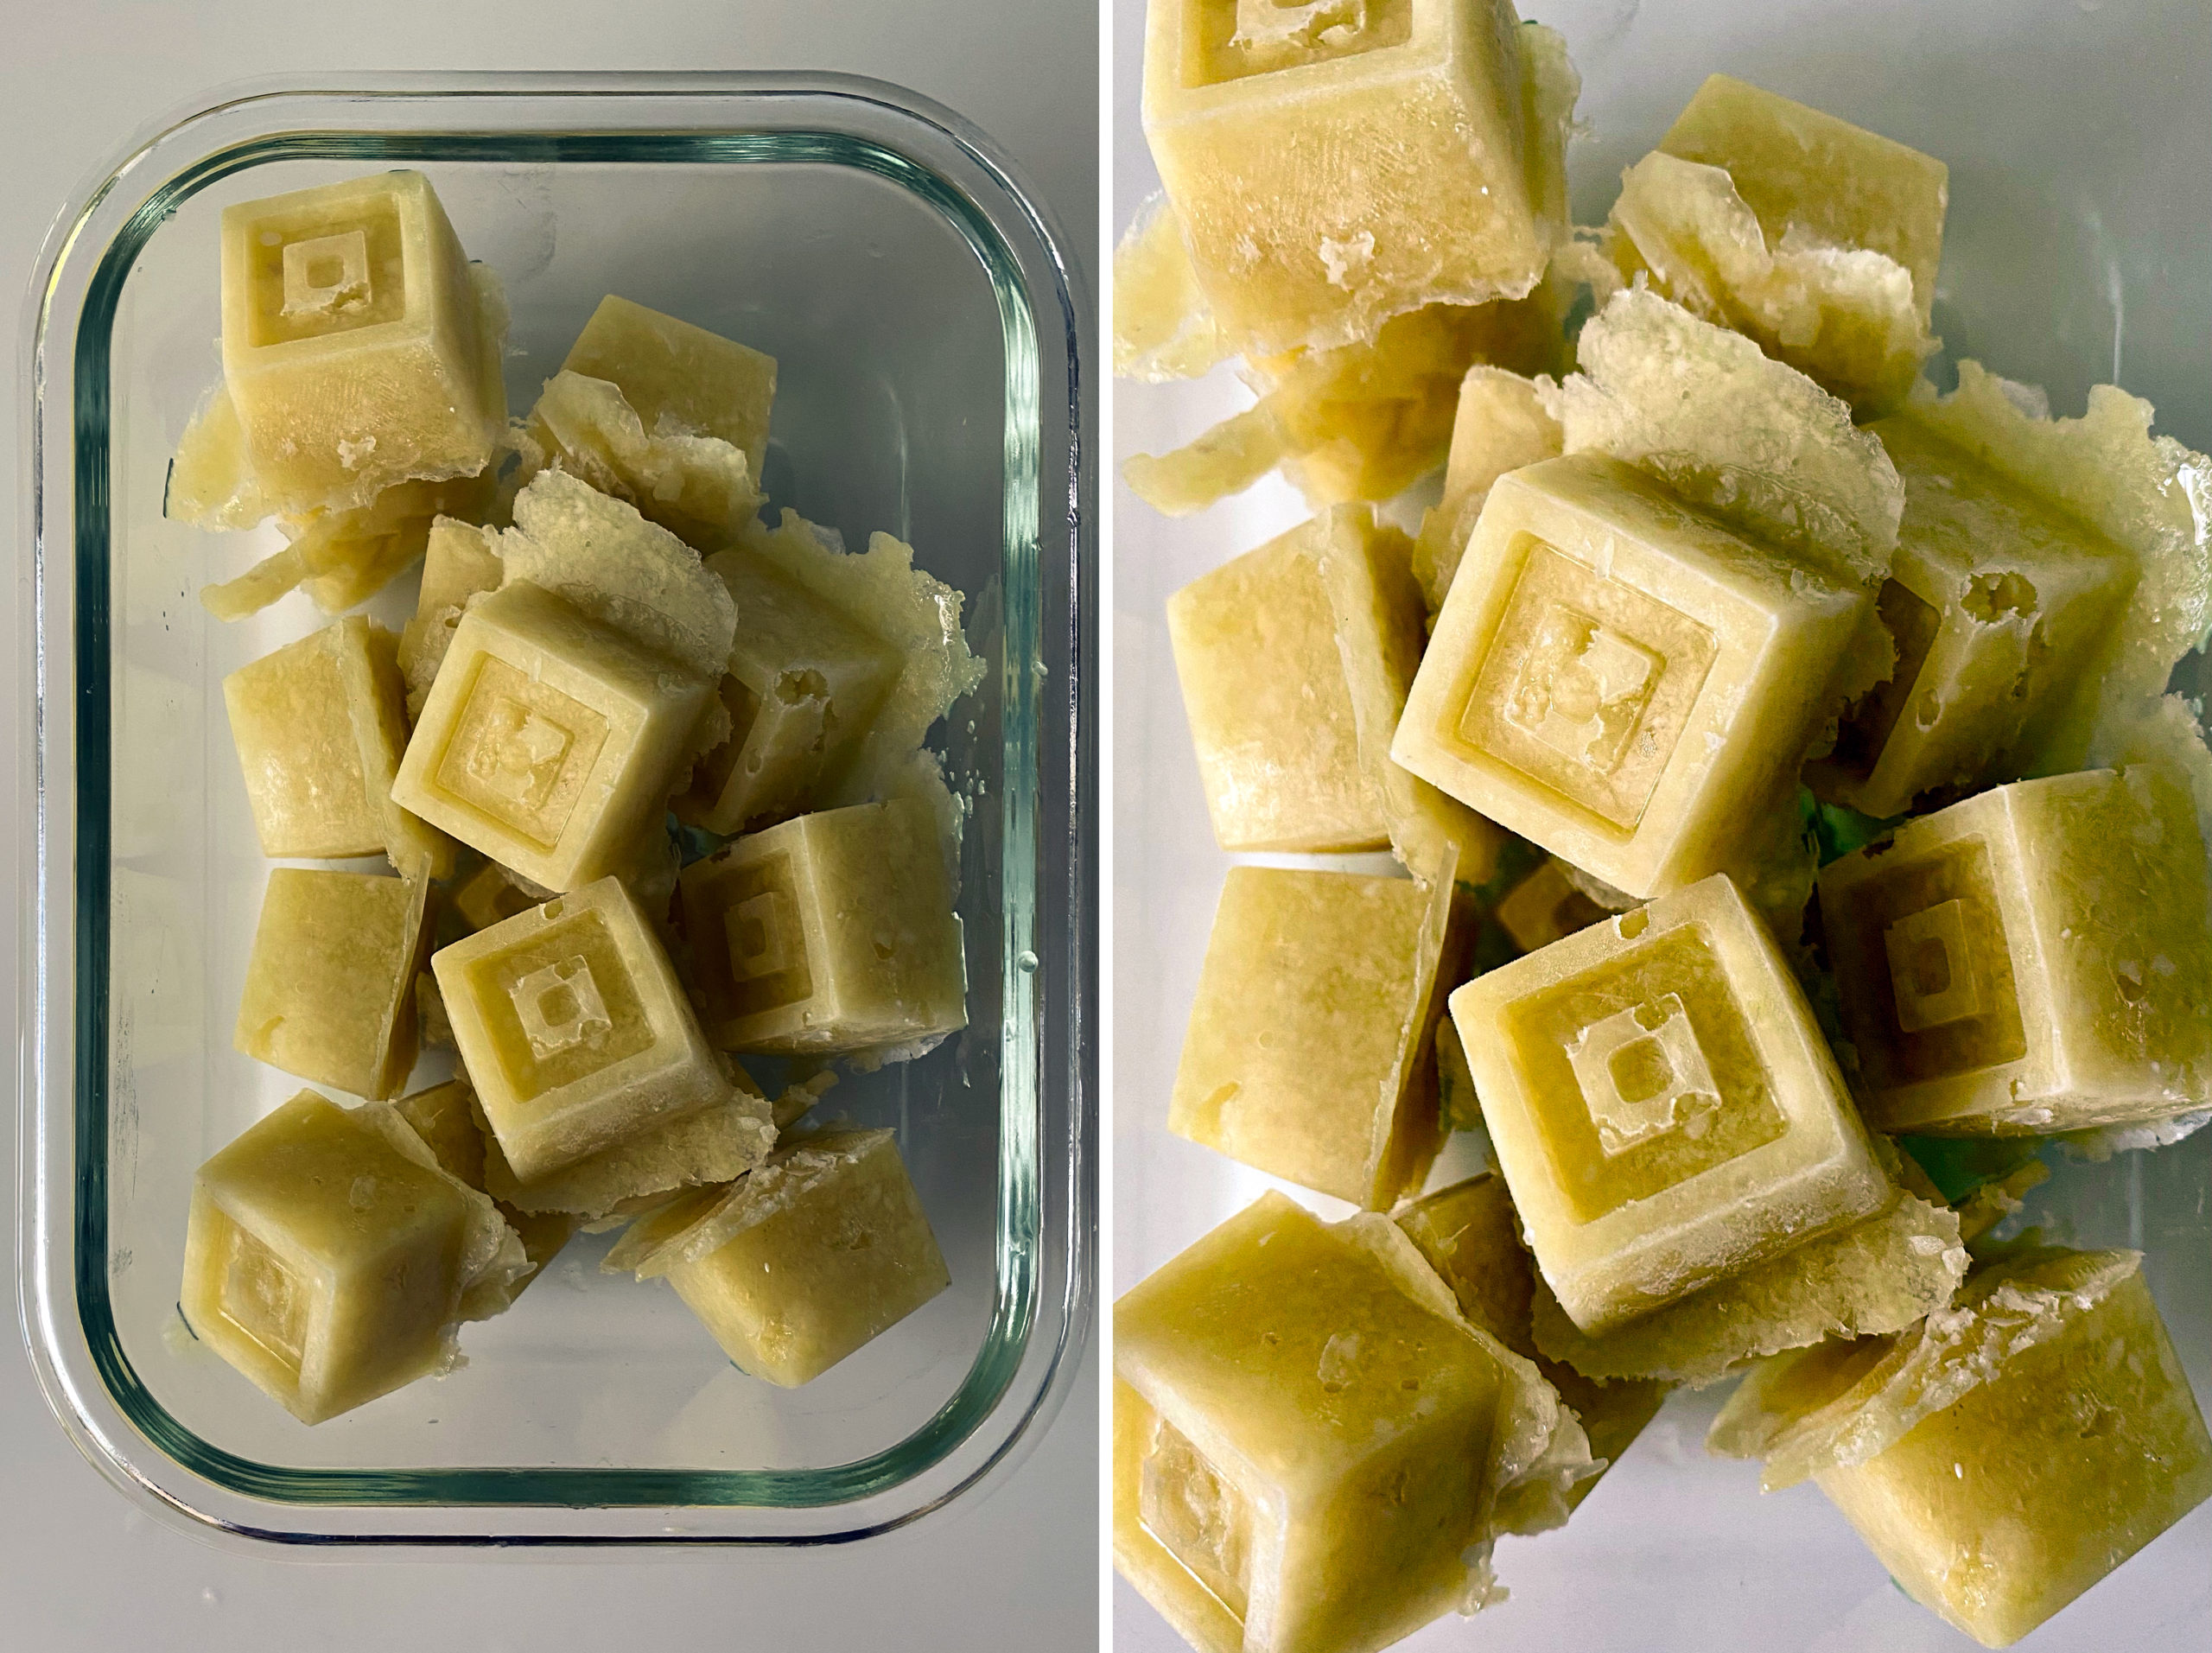 New Crop Frozen Crushed Ginger and Garlic Cubes EU Standard From